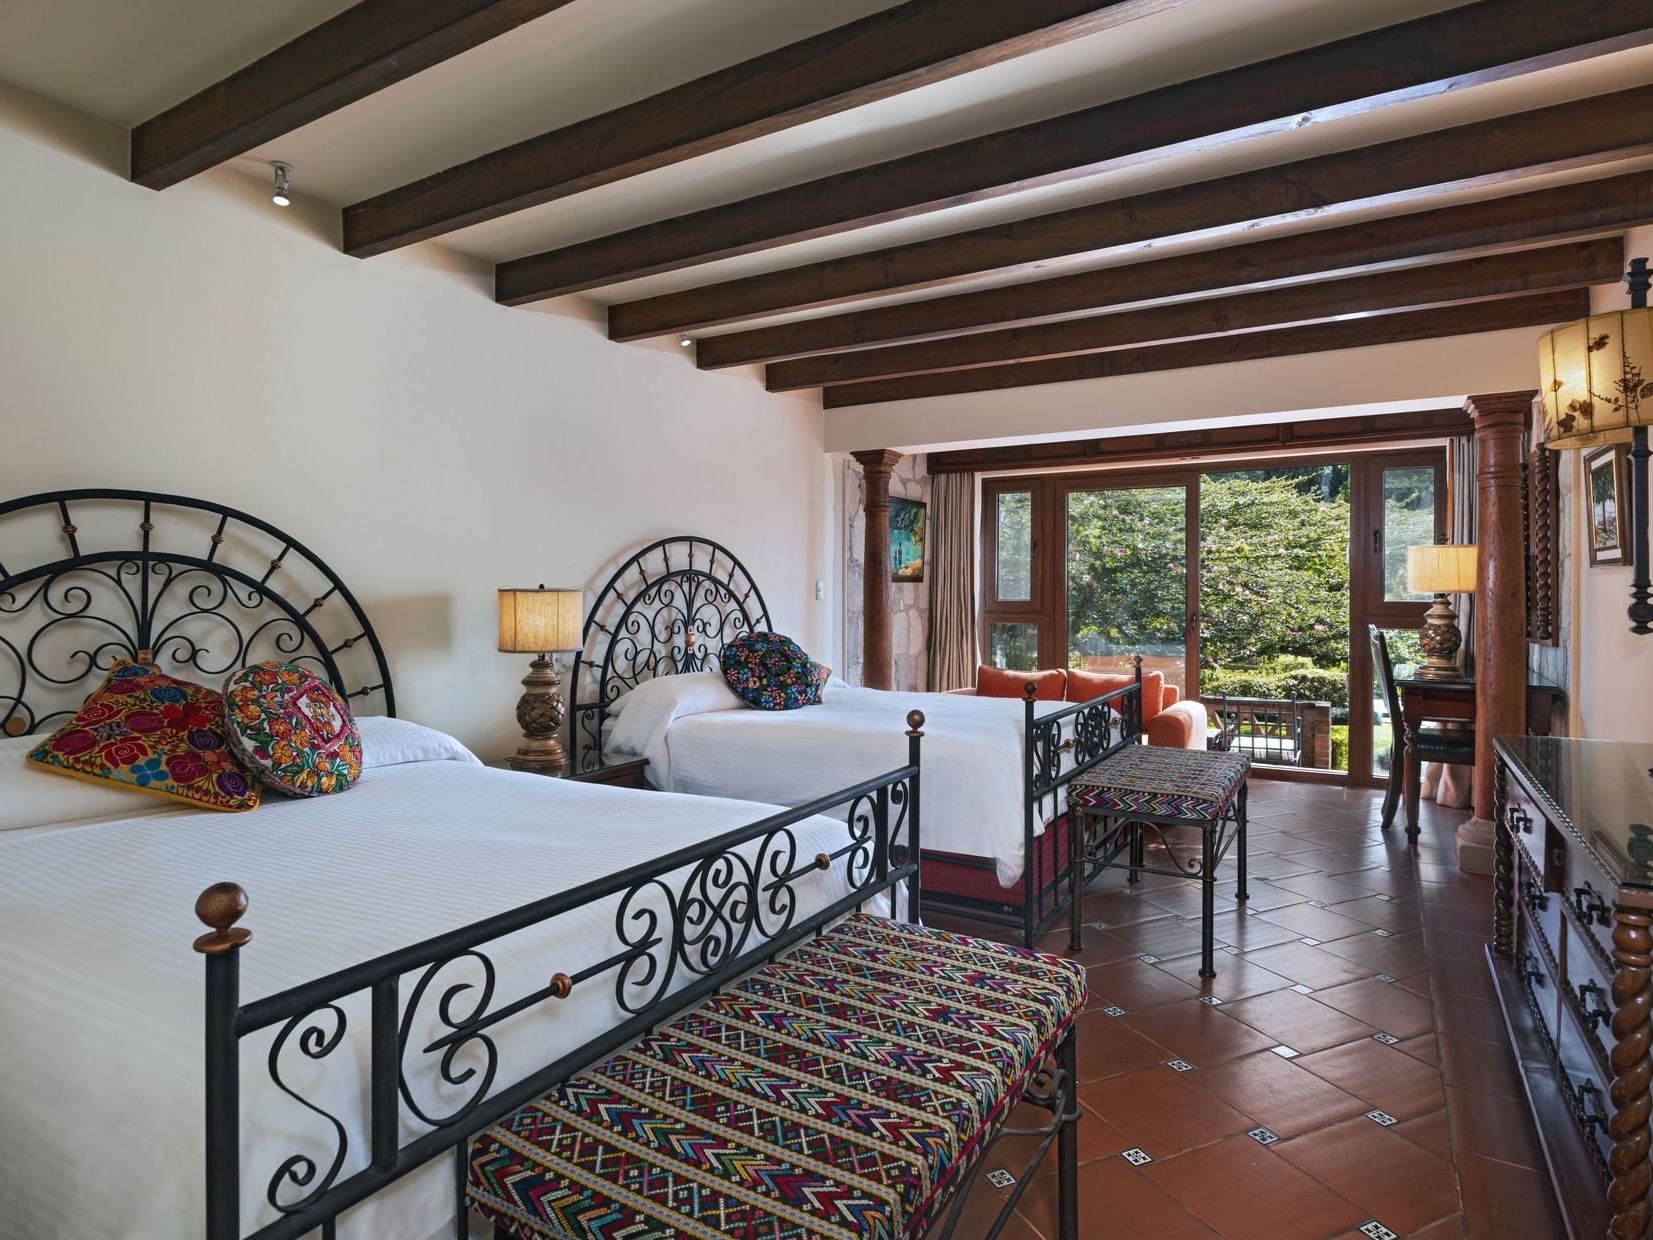 2 Beds & lounge area in Double Bed Garden View at Hotel Atitlan